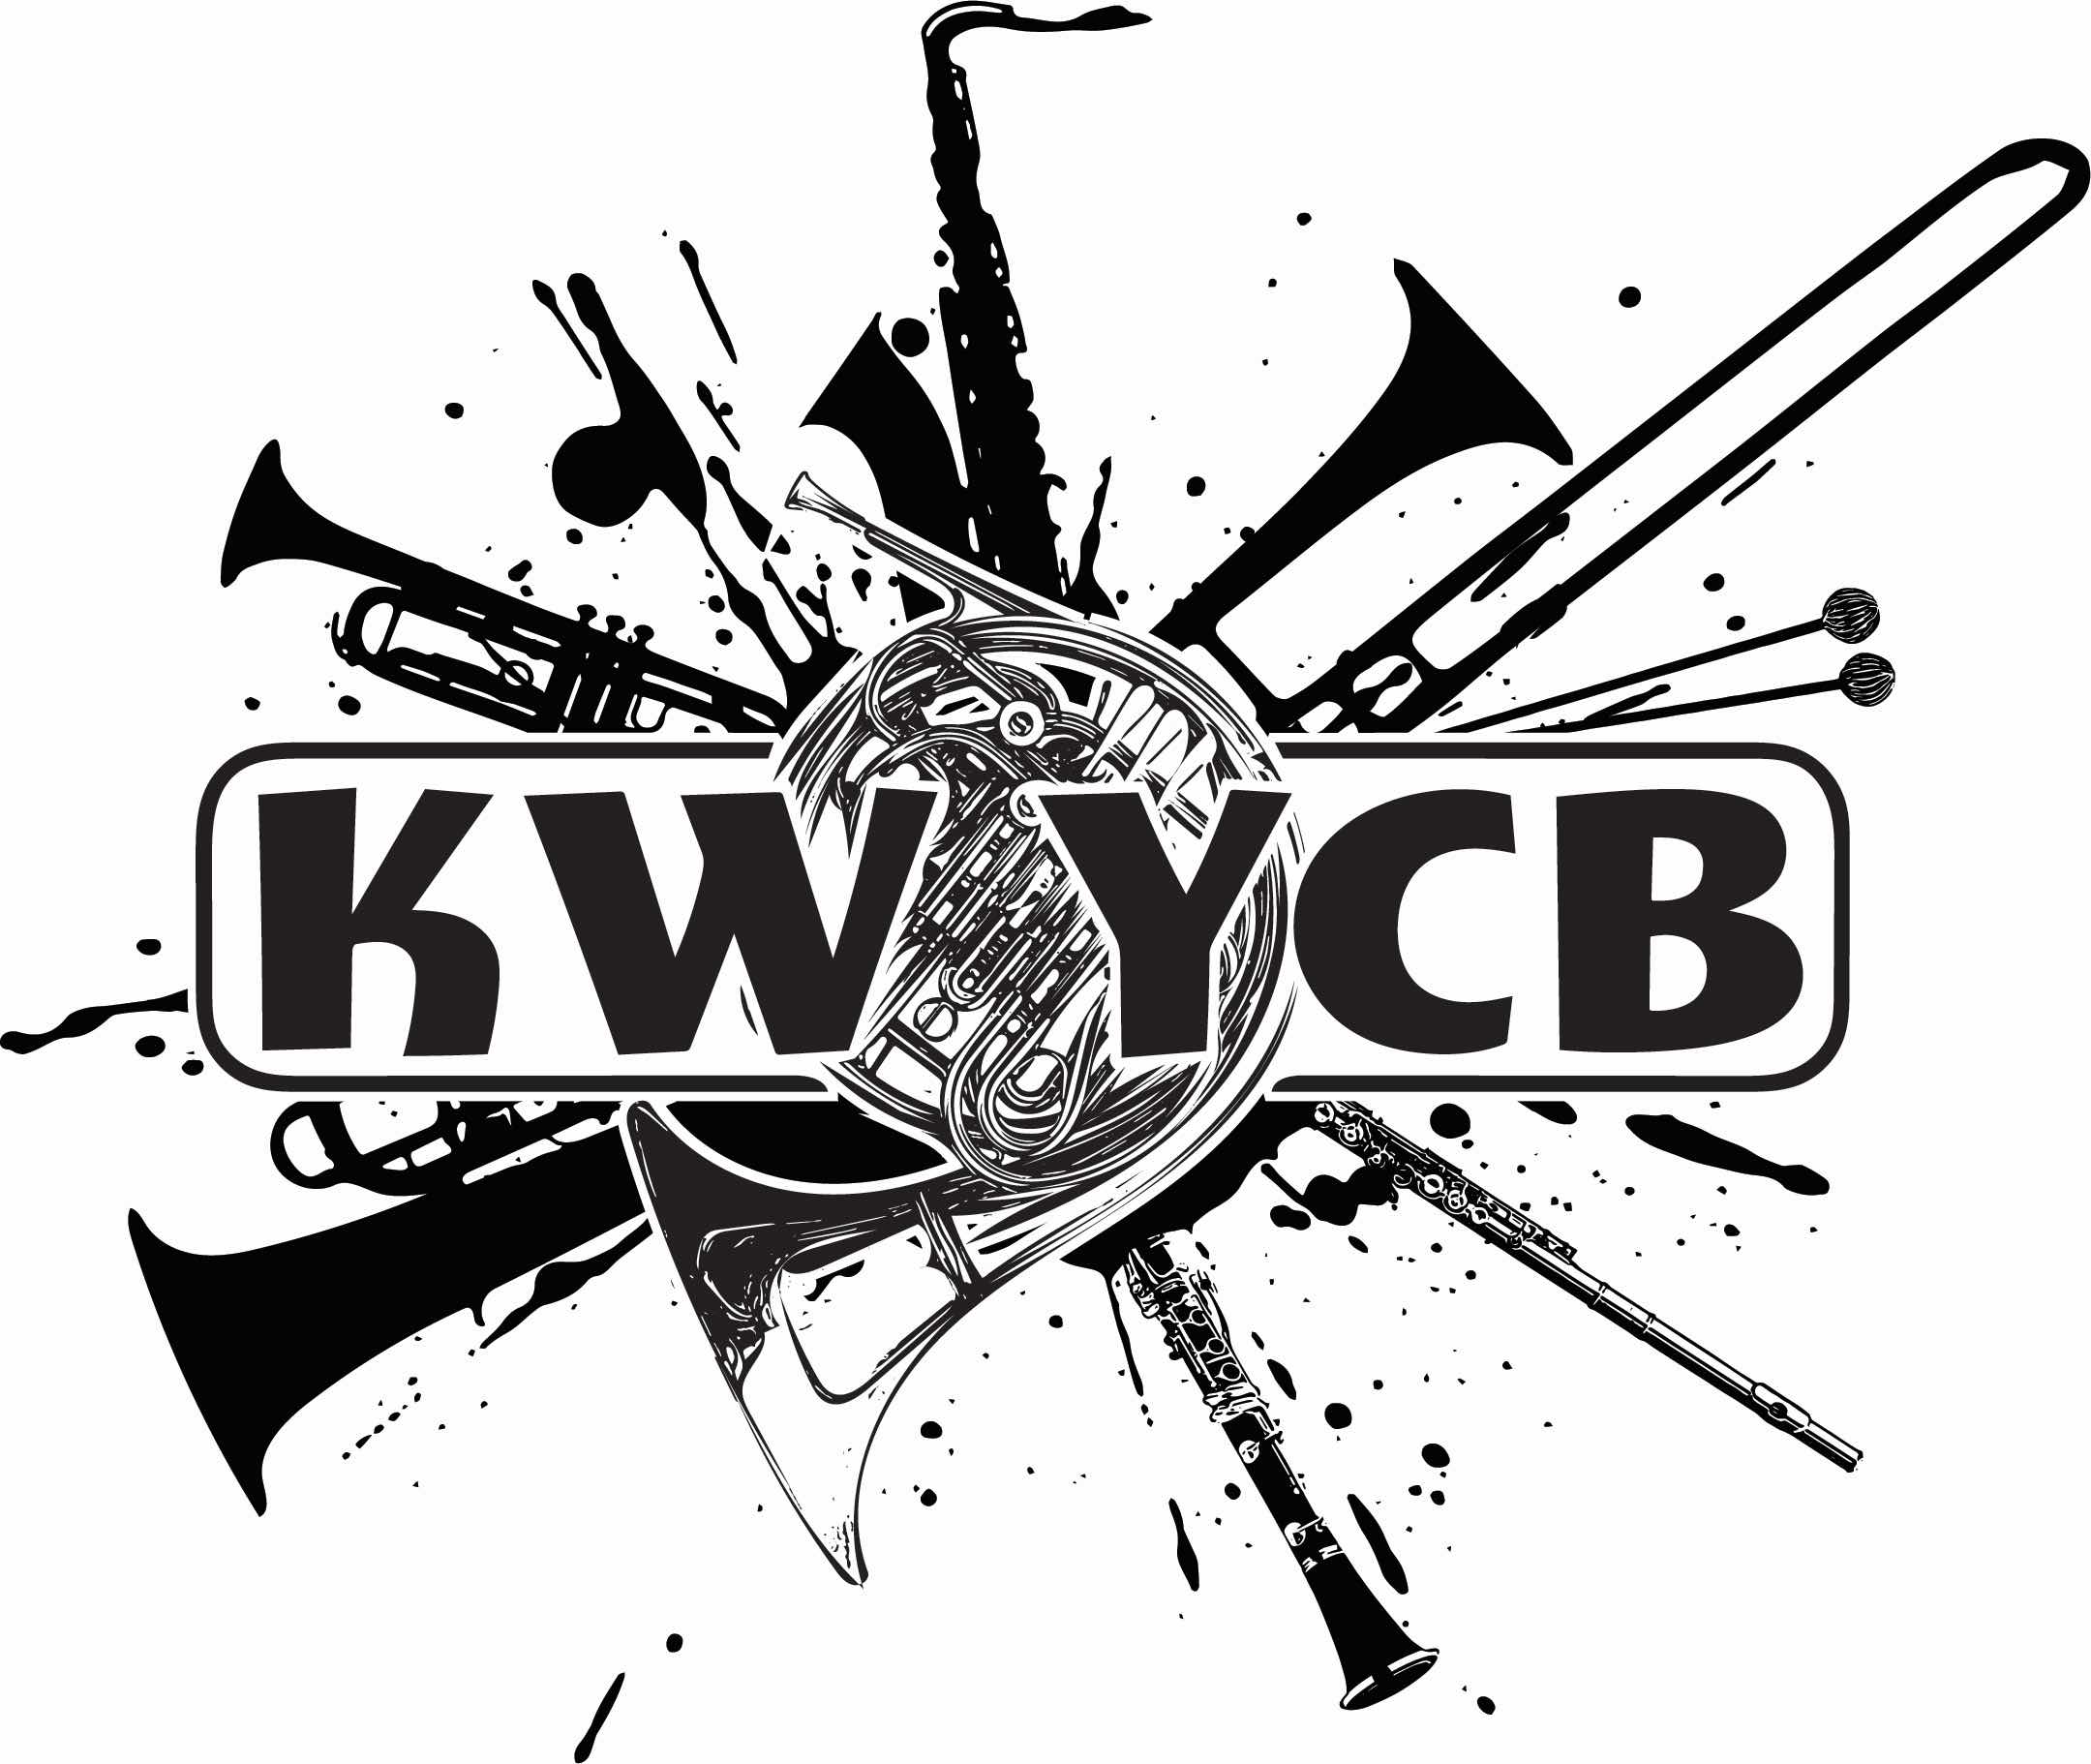 KW YCB presents “With Glowing Hearts